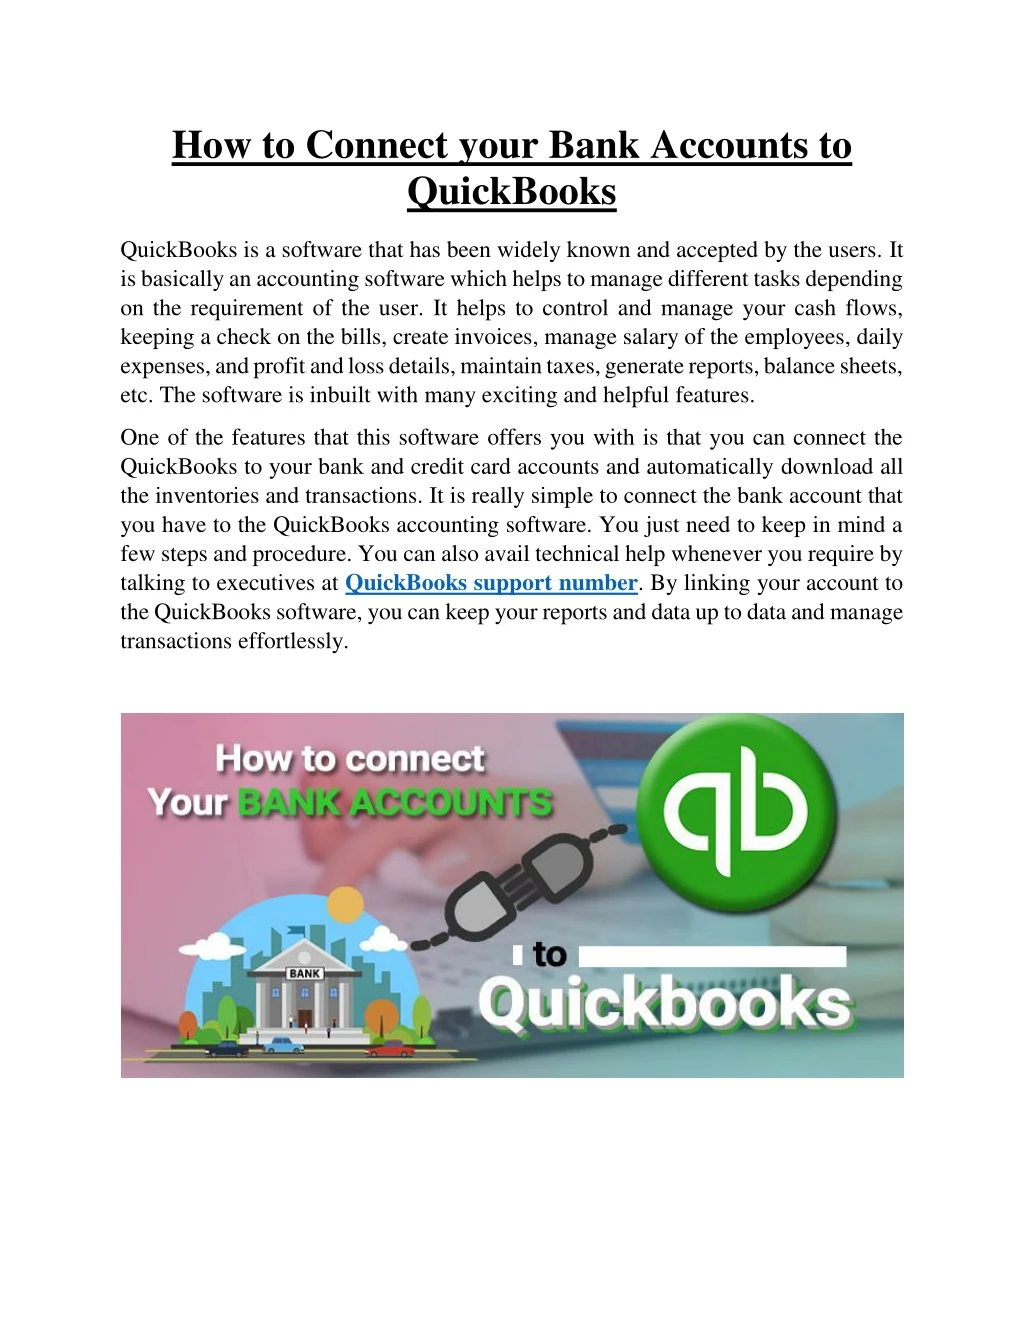 how to connect your bank accounts to quickbooks